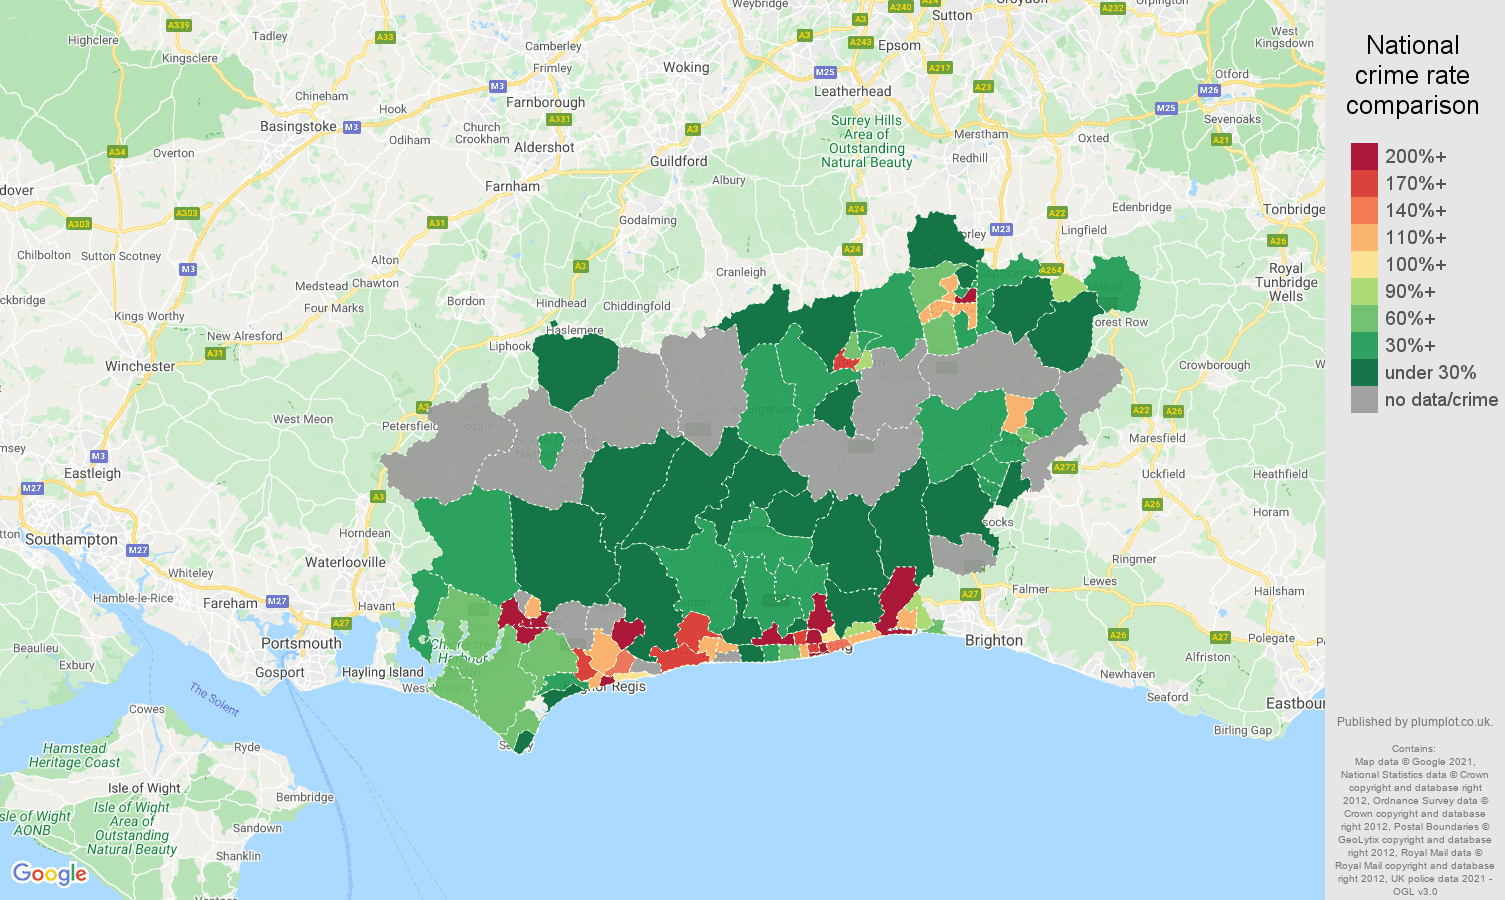 West Sussex bicycle theft crime rate comparison map